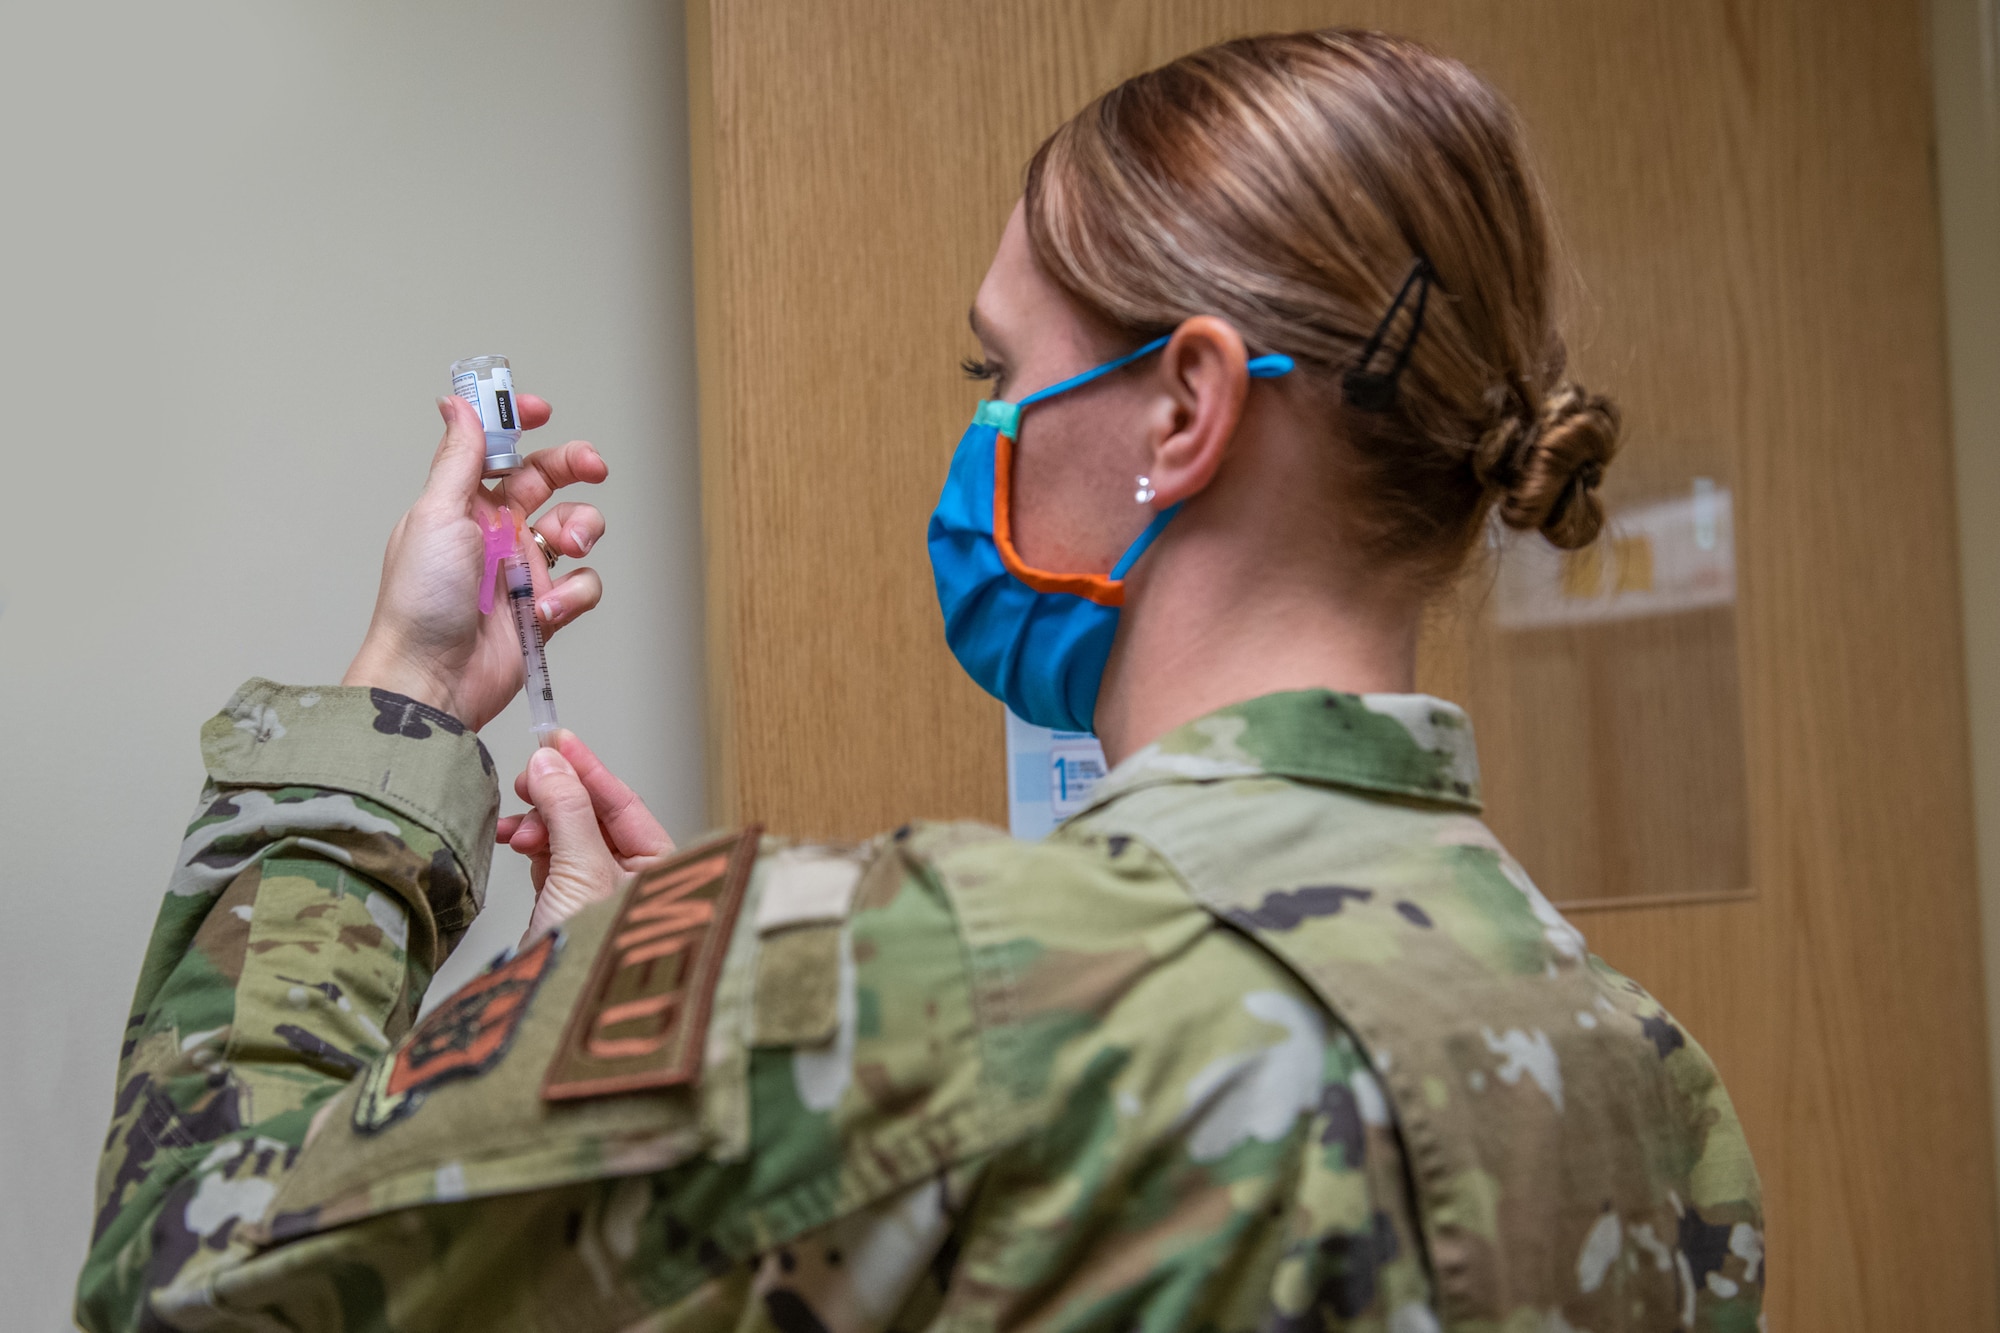 Tech. Sgt. Kelly Cummins, a medical technician in the 419th Medical Squadron, draws COVID-19 vaccines in preparation to administer shots to 419th Fighter Wing reservists, Jan. 9, 2021, at Hill Air Force Base, Utah.